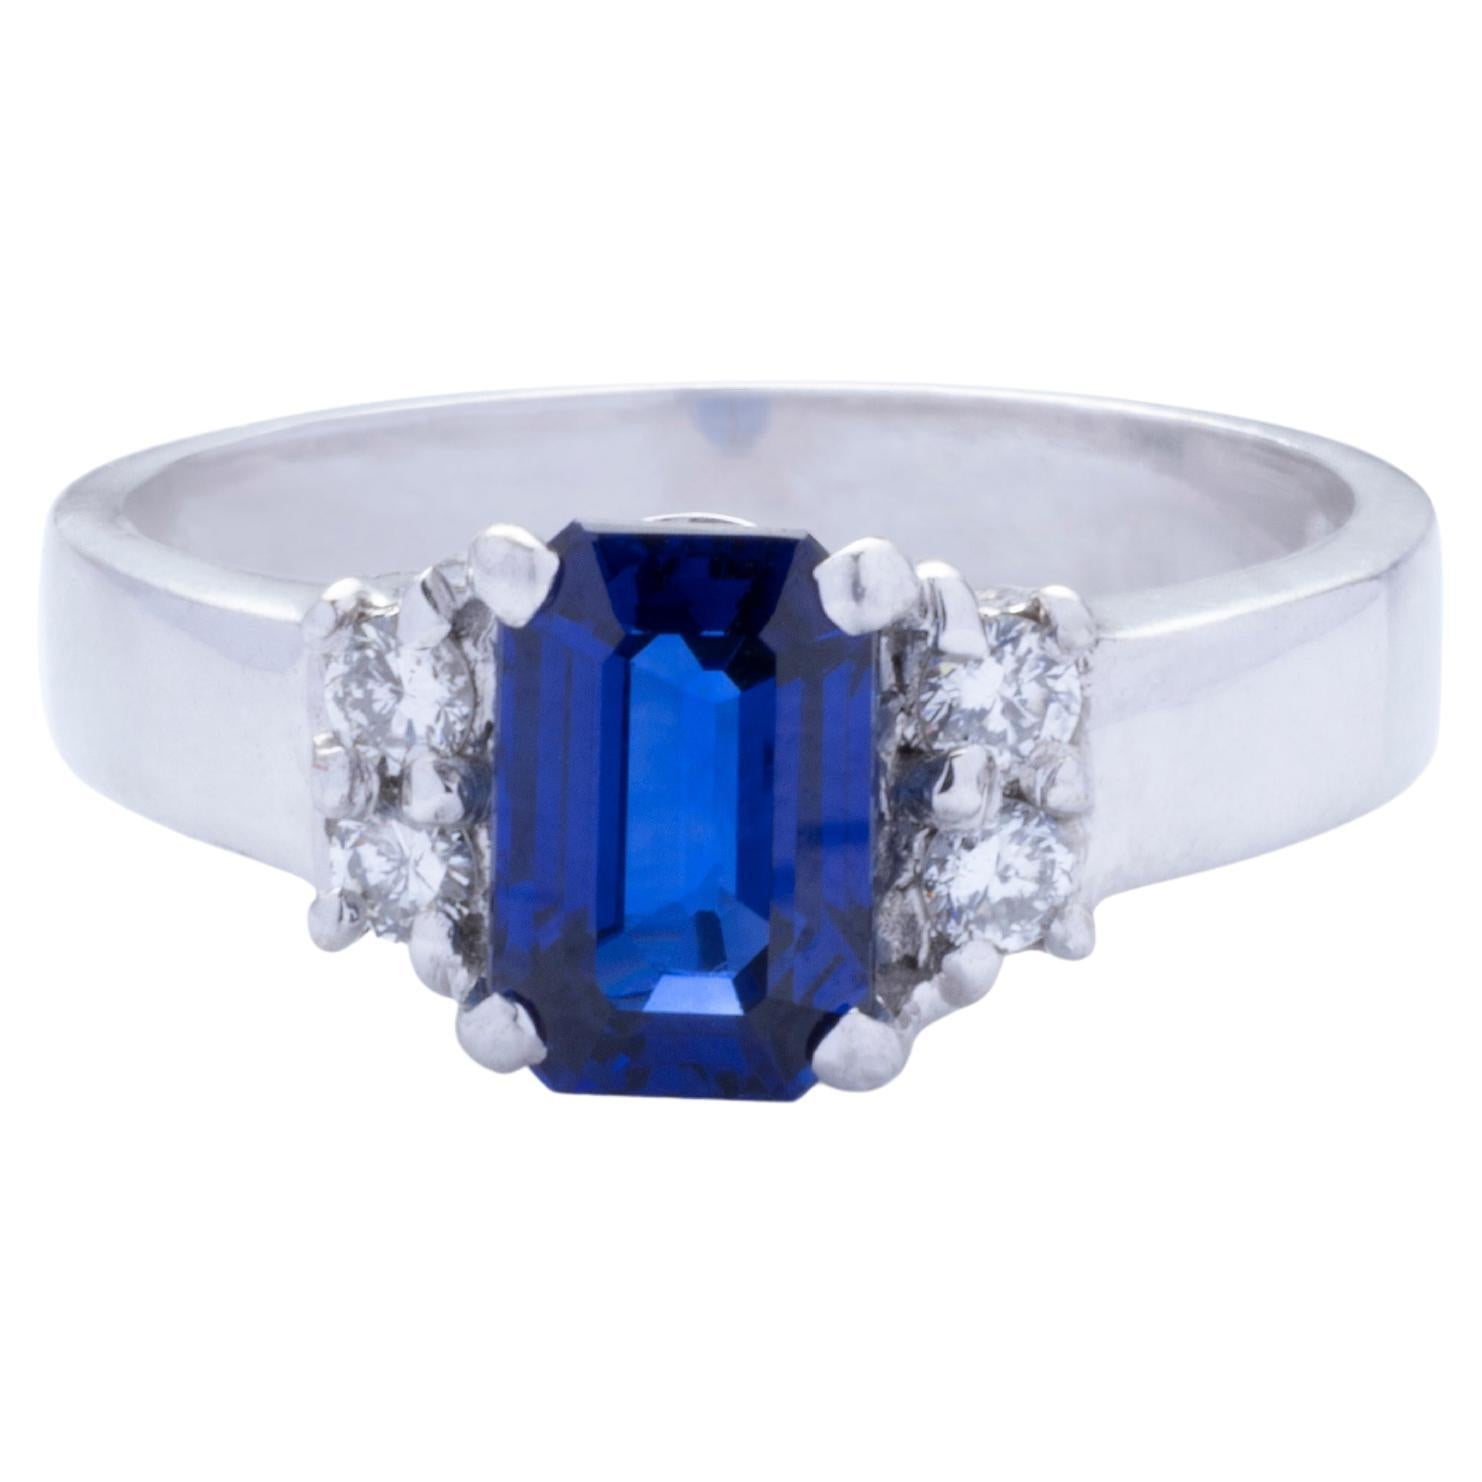 18k White Gold 2.03ct Emerald Cut Royal Blue Sapphire & Diamond Engagement Ring For Sale